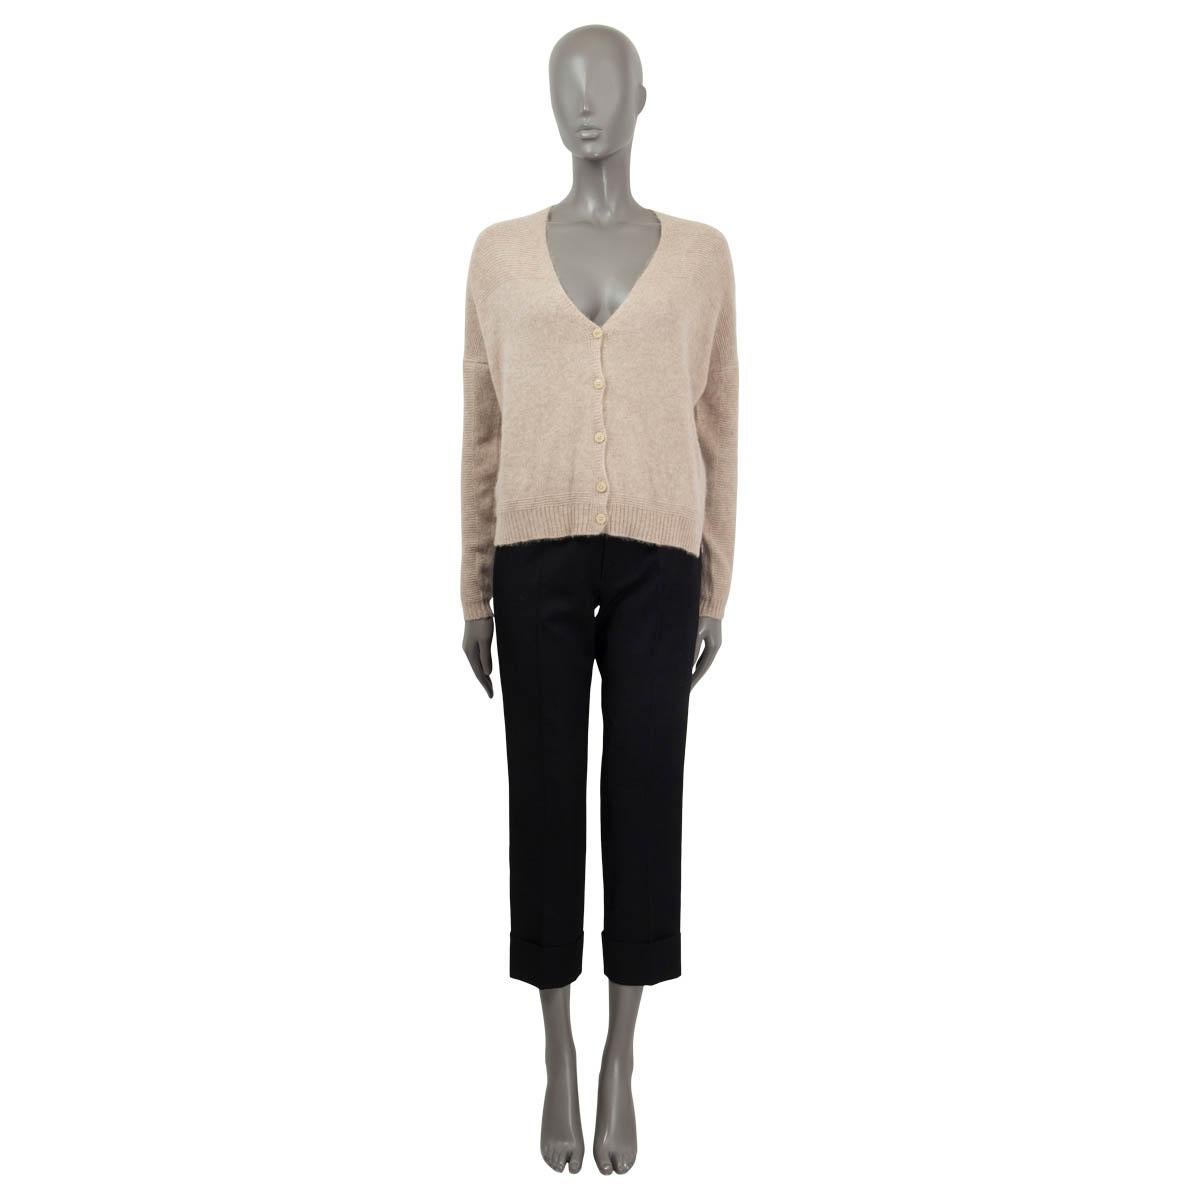 100% authentic Loro Piana fine knit cardigan in beige cashmere (60%) and silk (40%). Opens with five ivory colored buttons in the front and features cropped cut, a V-shaped neckline and ribbed cuffs and hem. Has been worn and is in excellent